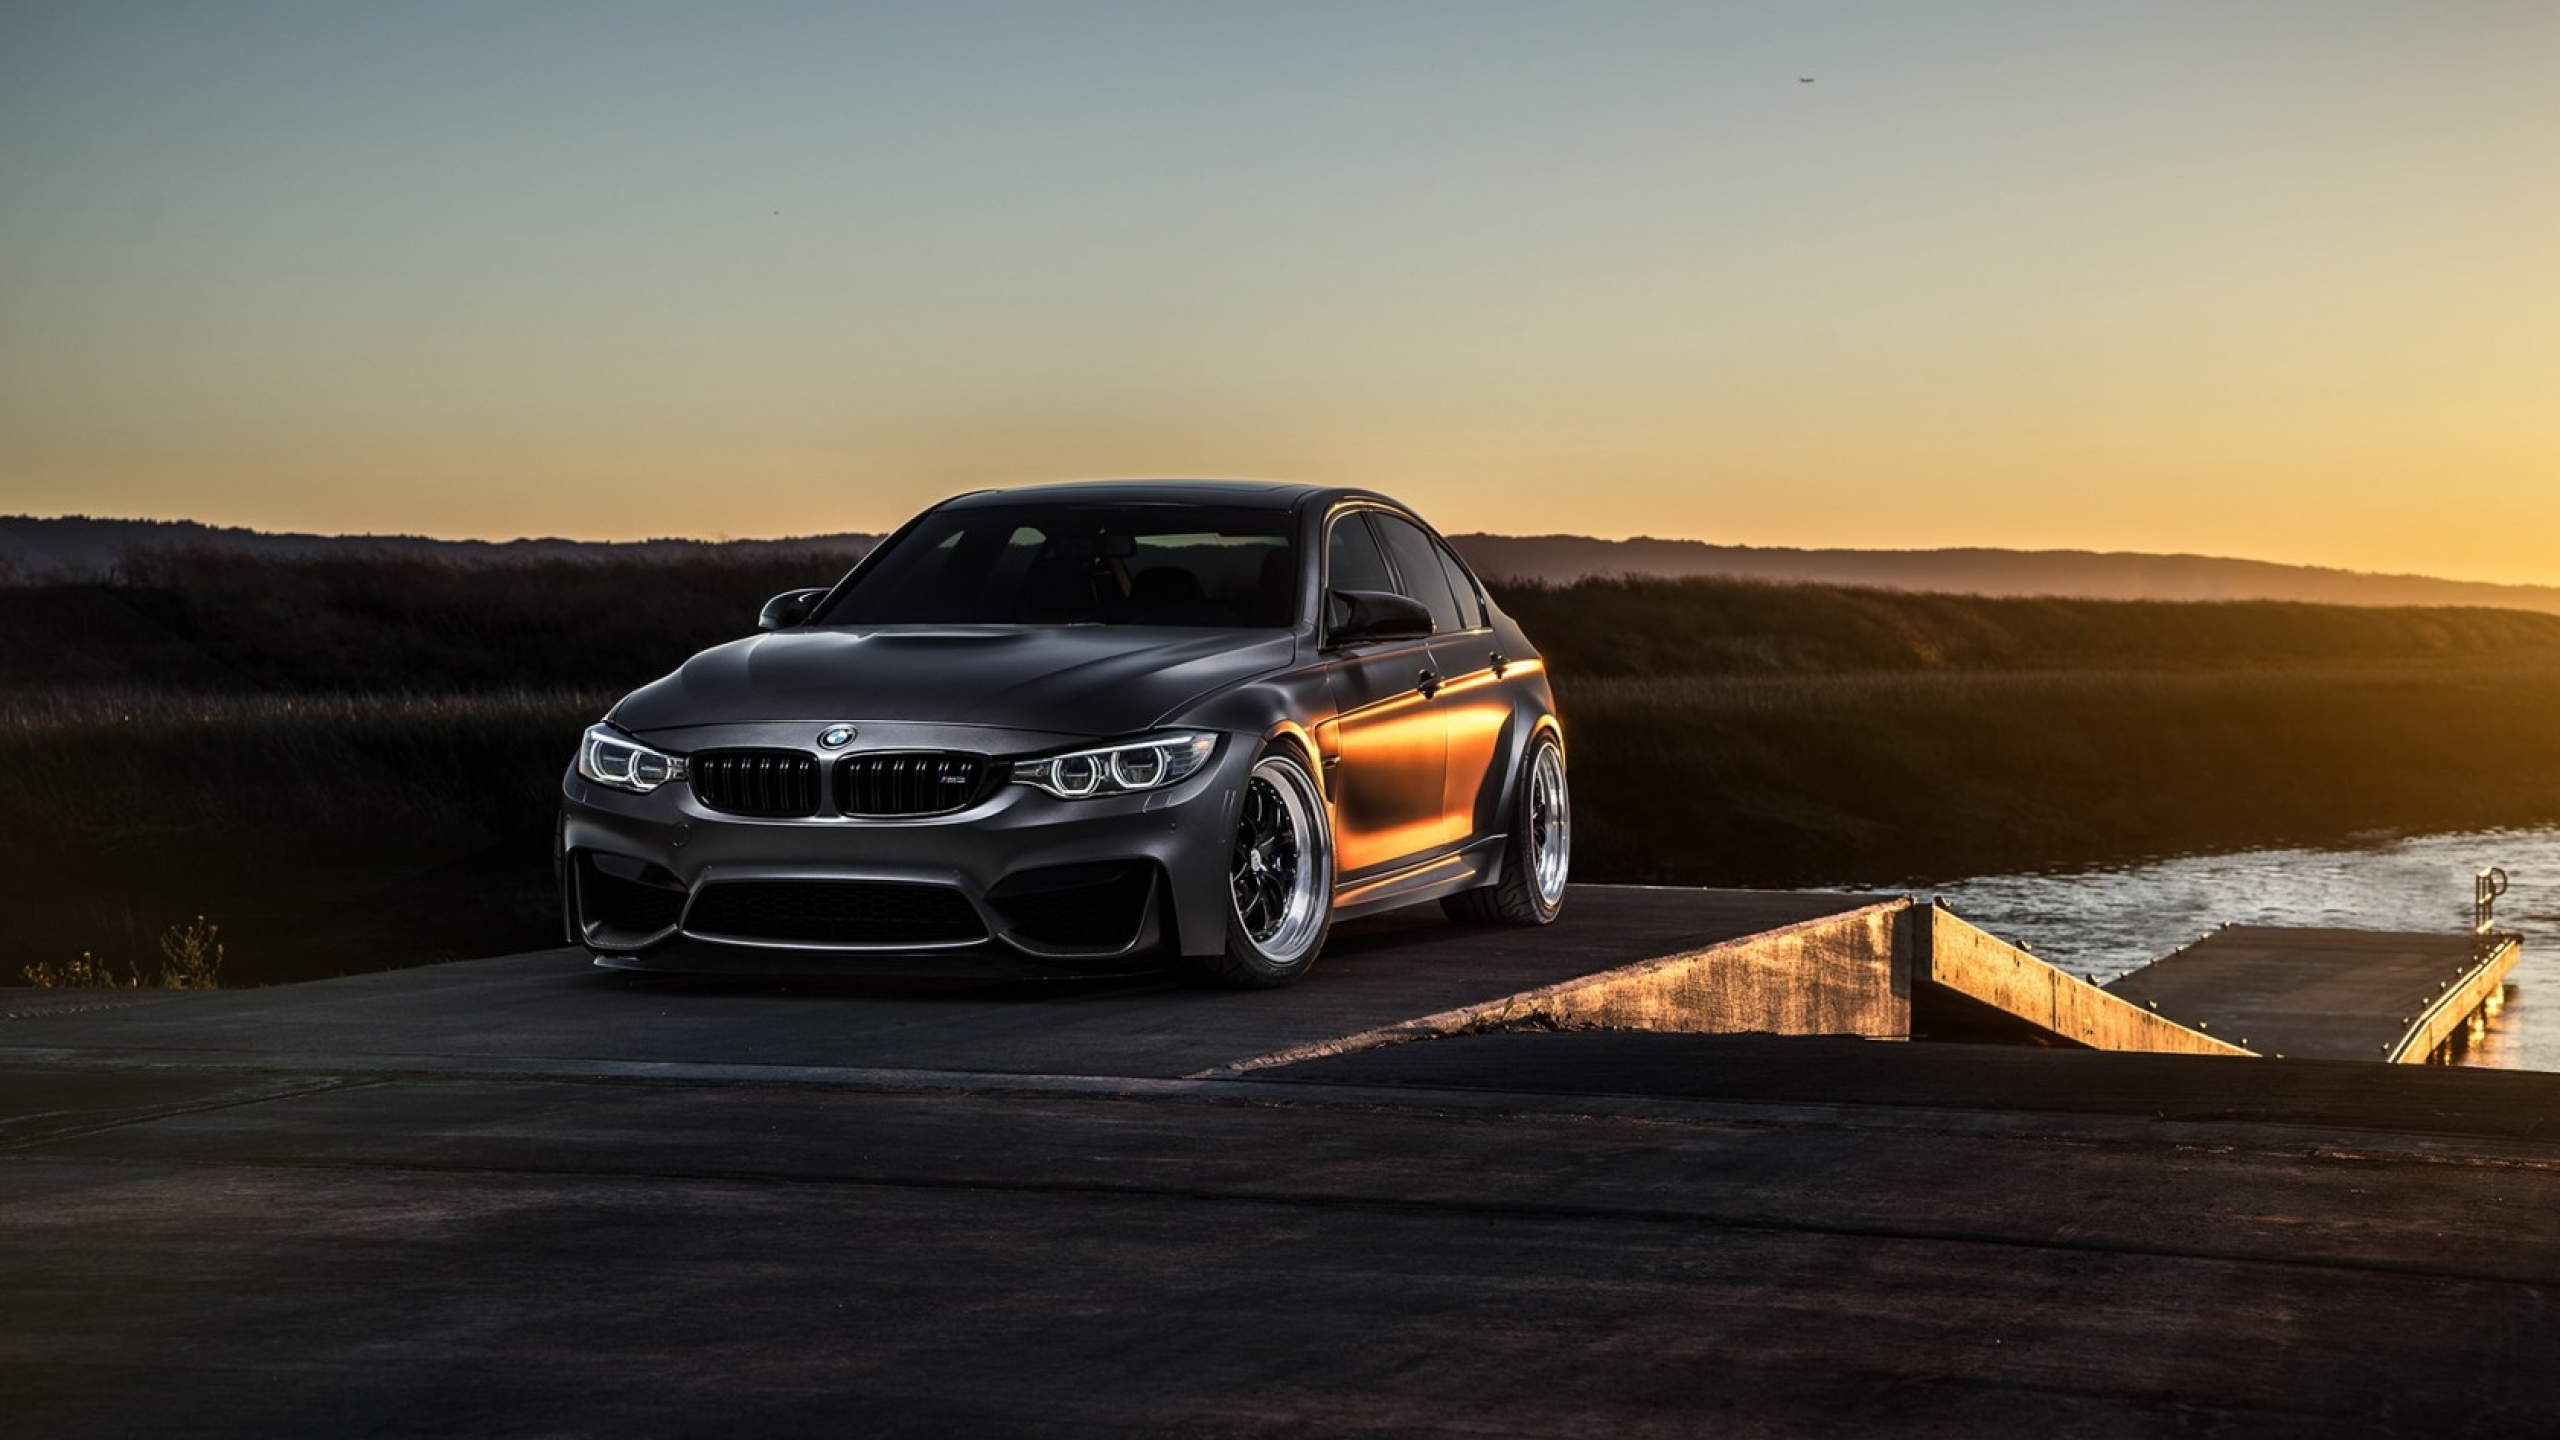 2560x1440 Bmw F80 M3 1440p Resolution Wallpaper Hd Cars 4k Wallpapers Images Photos And Background Wallpapers Den